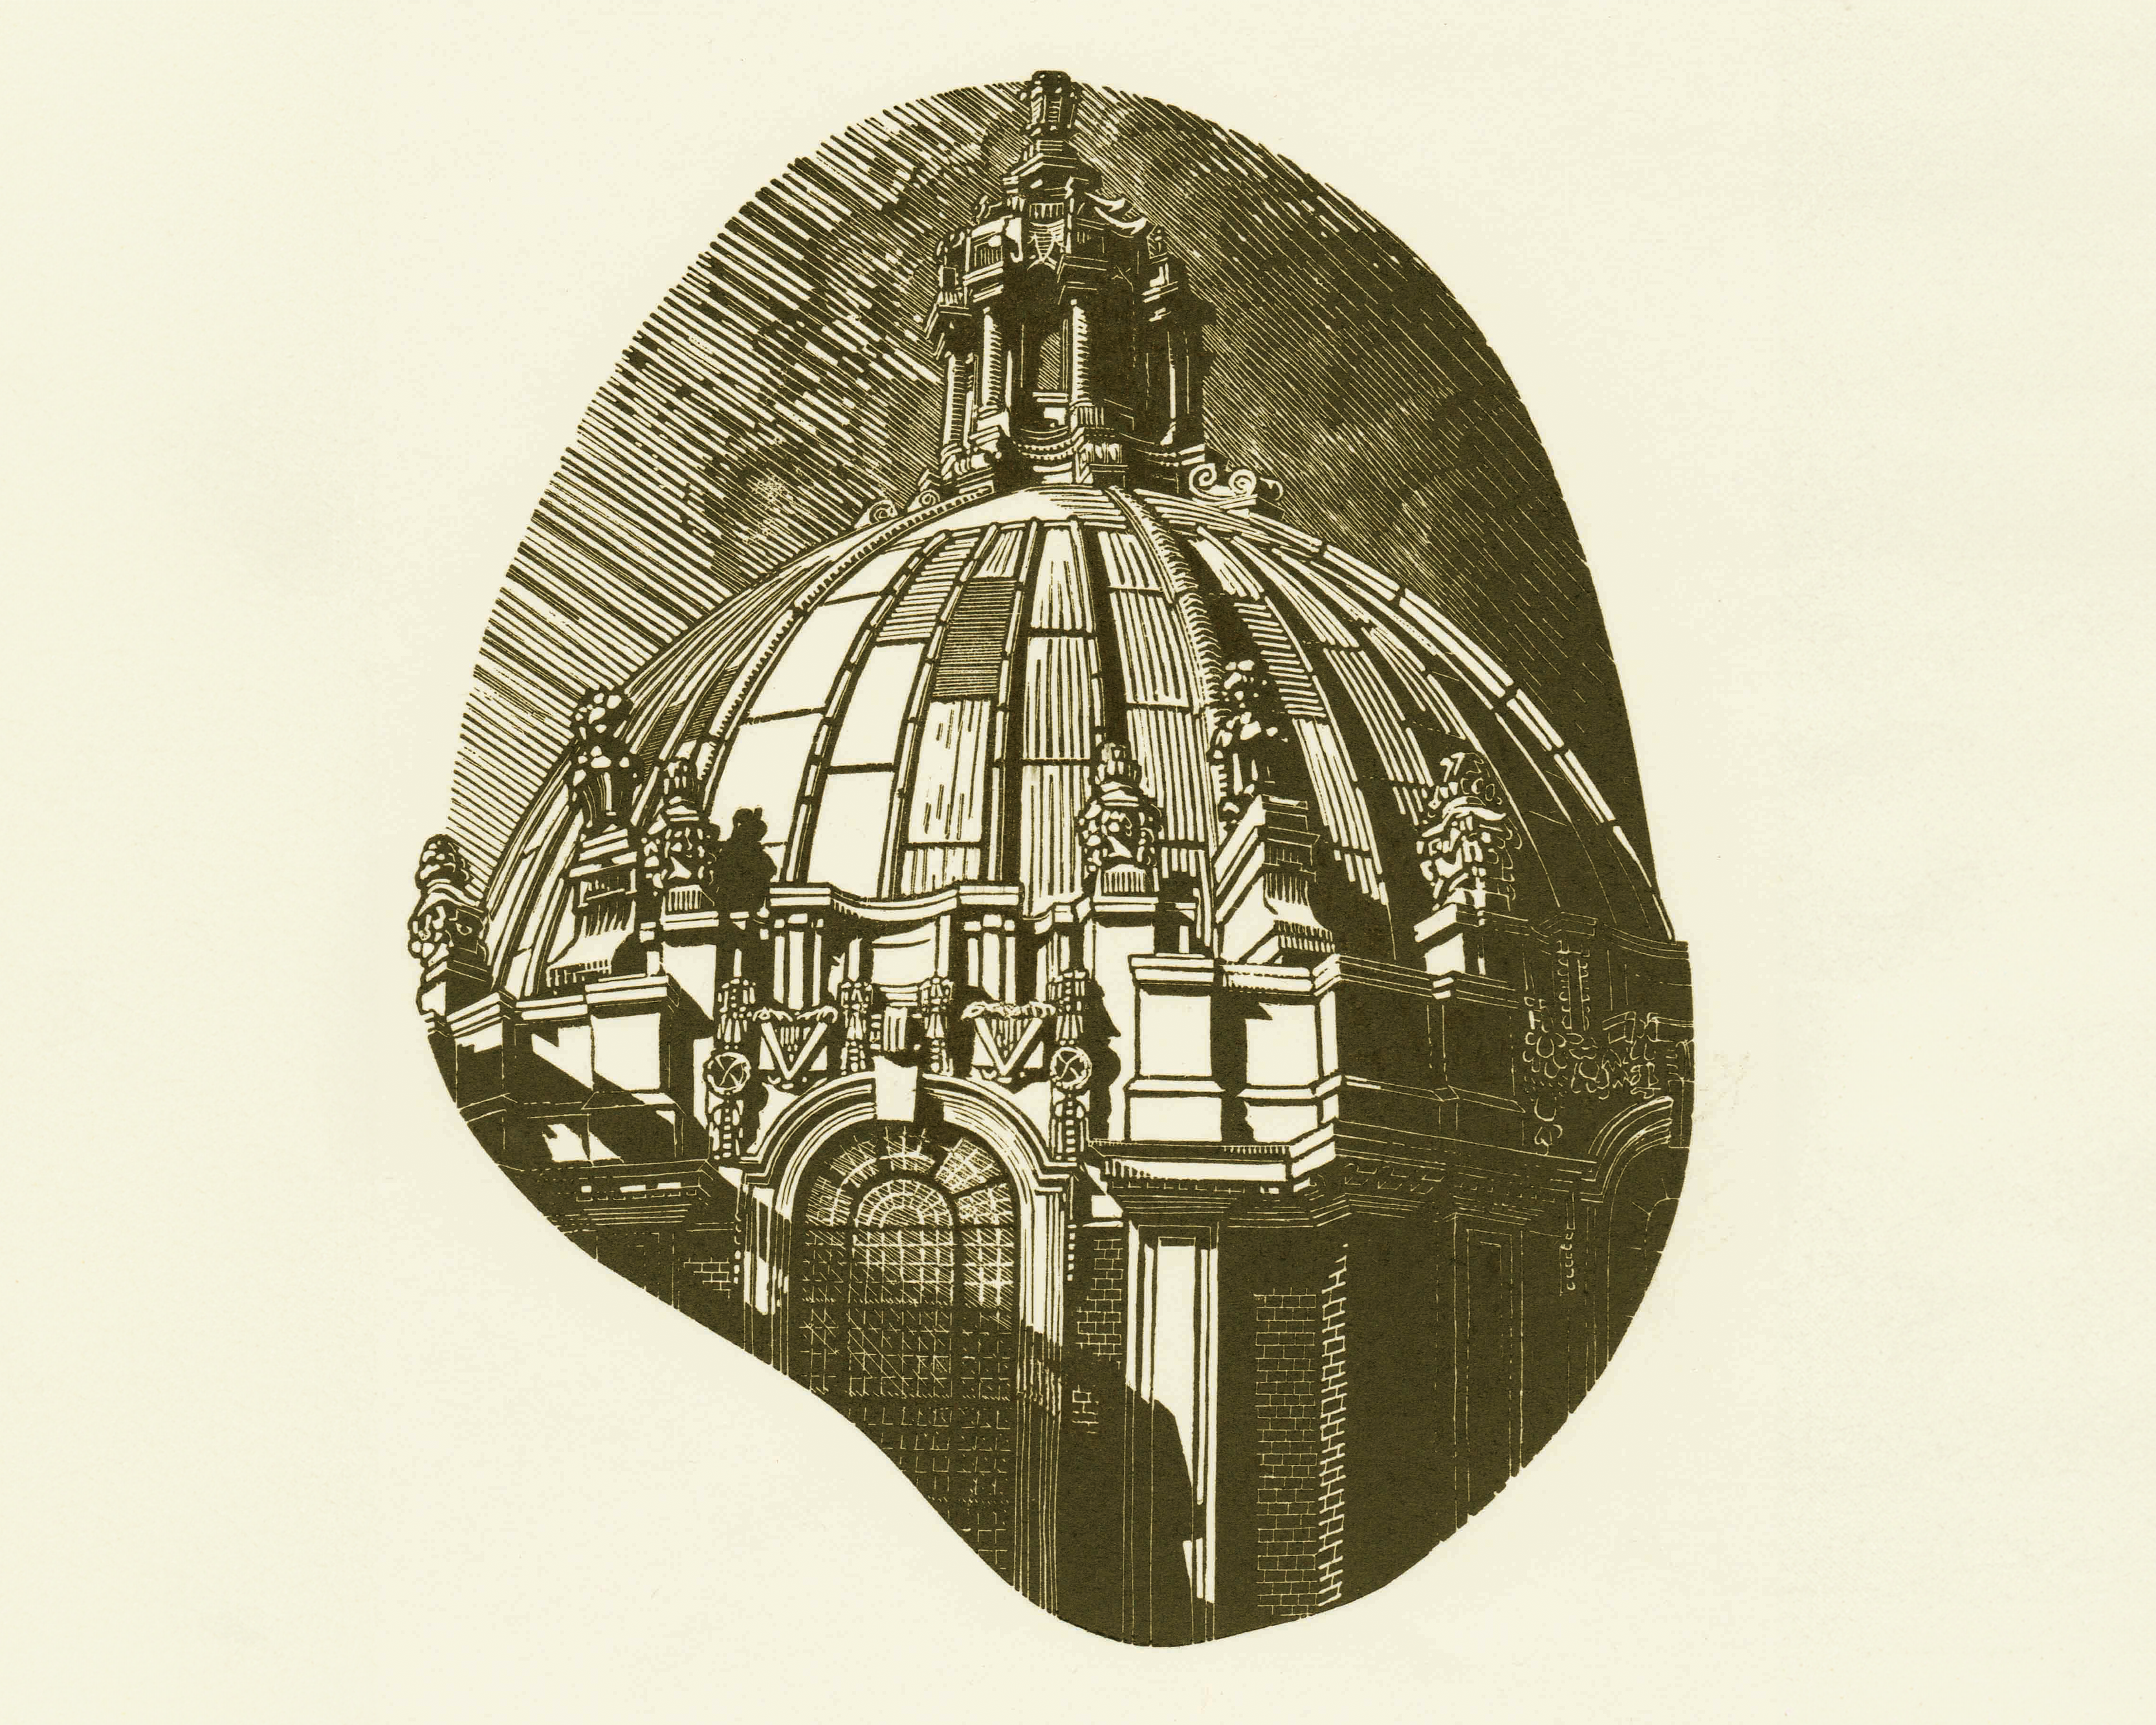 An image of a wood engraving by Anne Desmet of a library dome architectural detail.